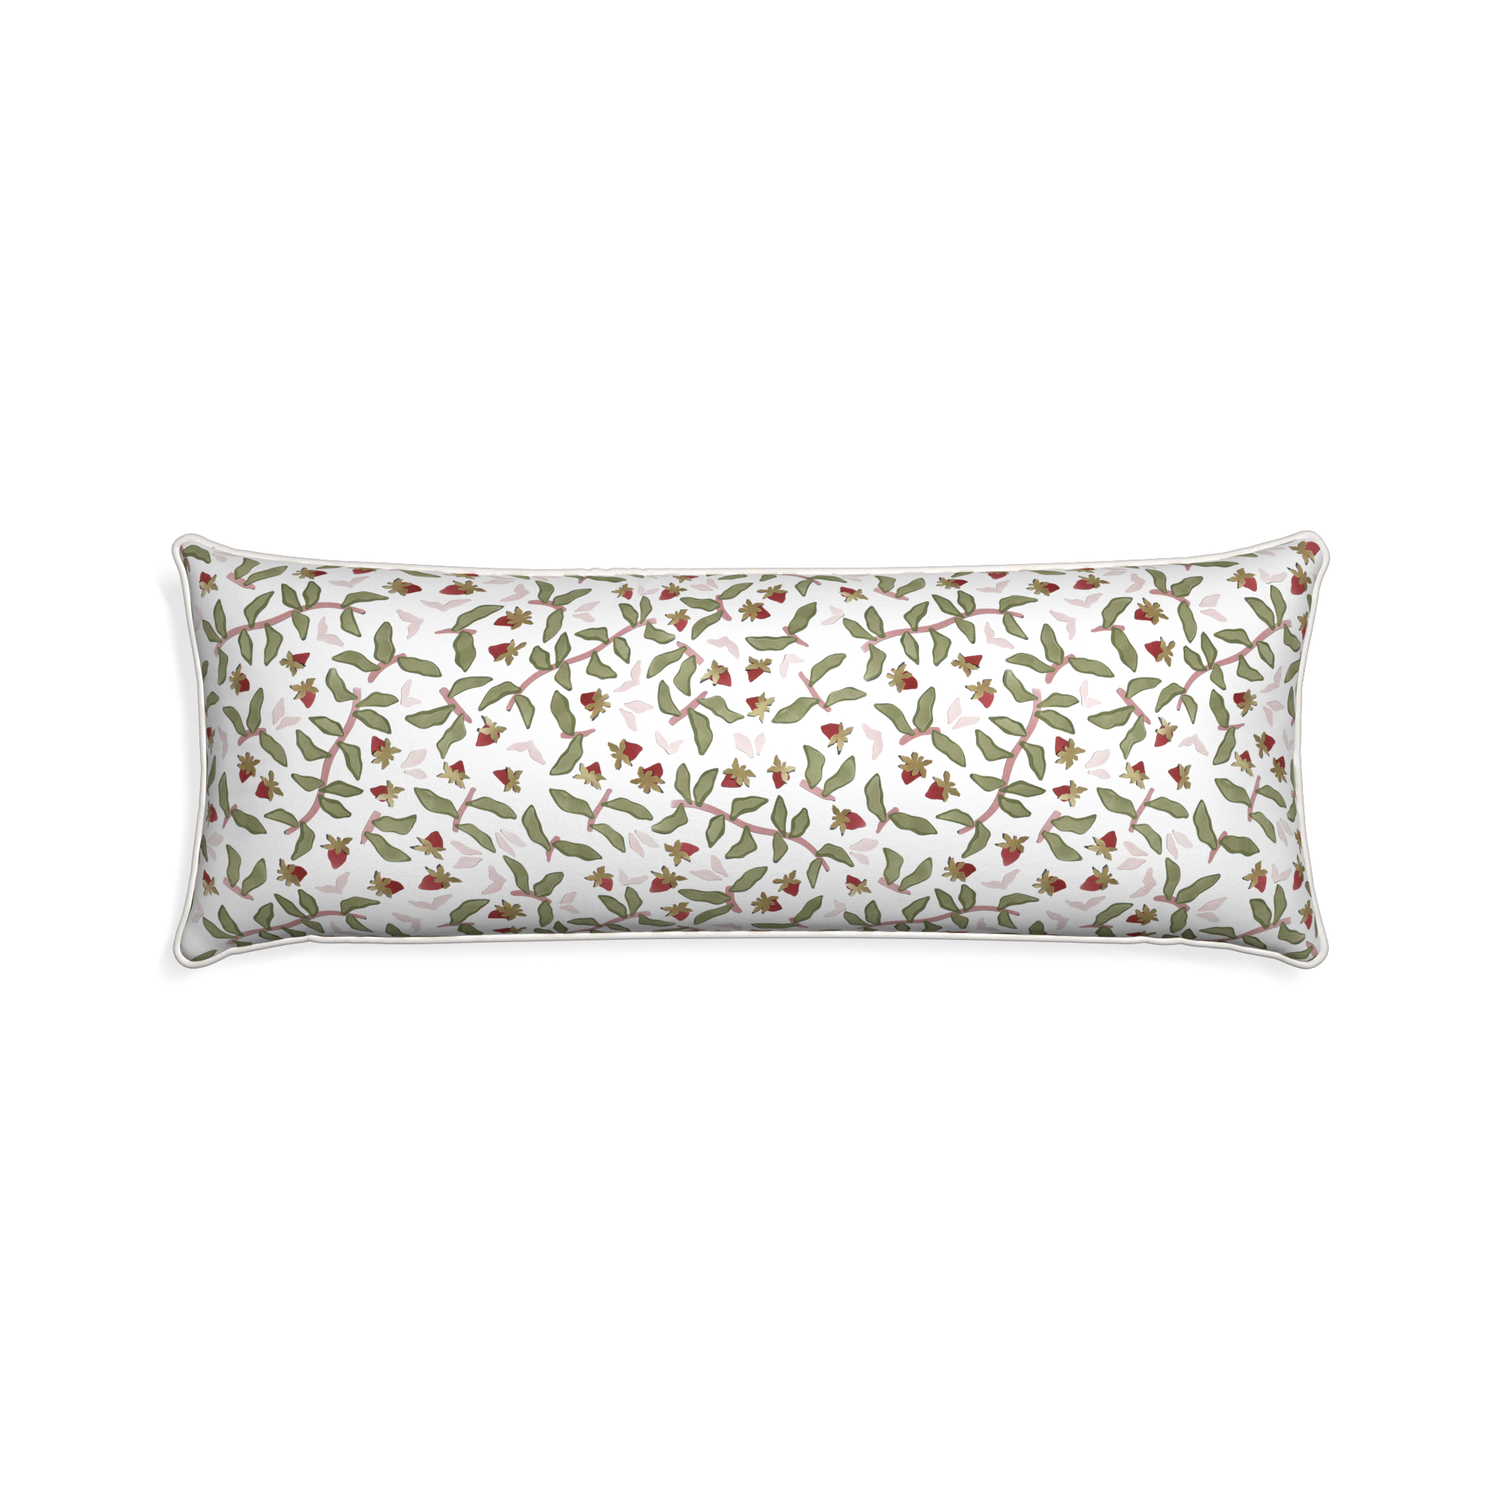 Xl-lumbar nellie custom strawberry & botanicalpillow with snow piping on white background